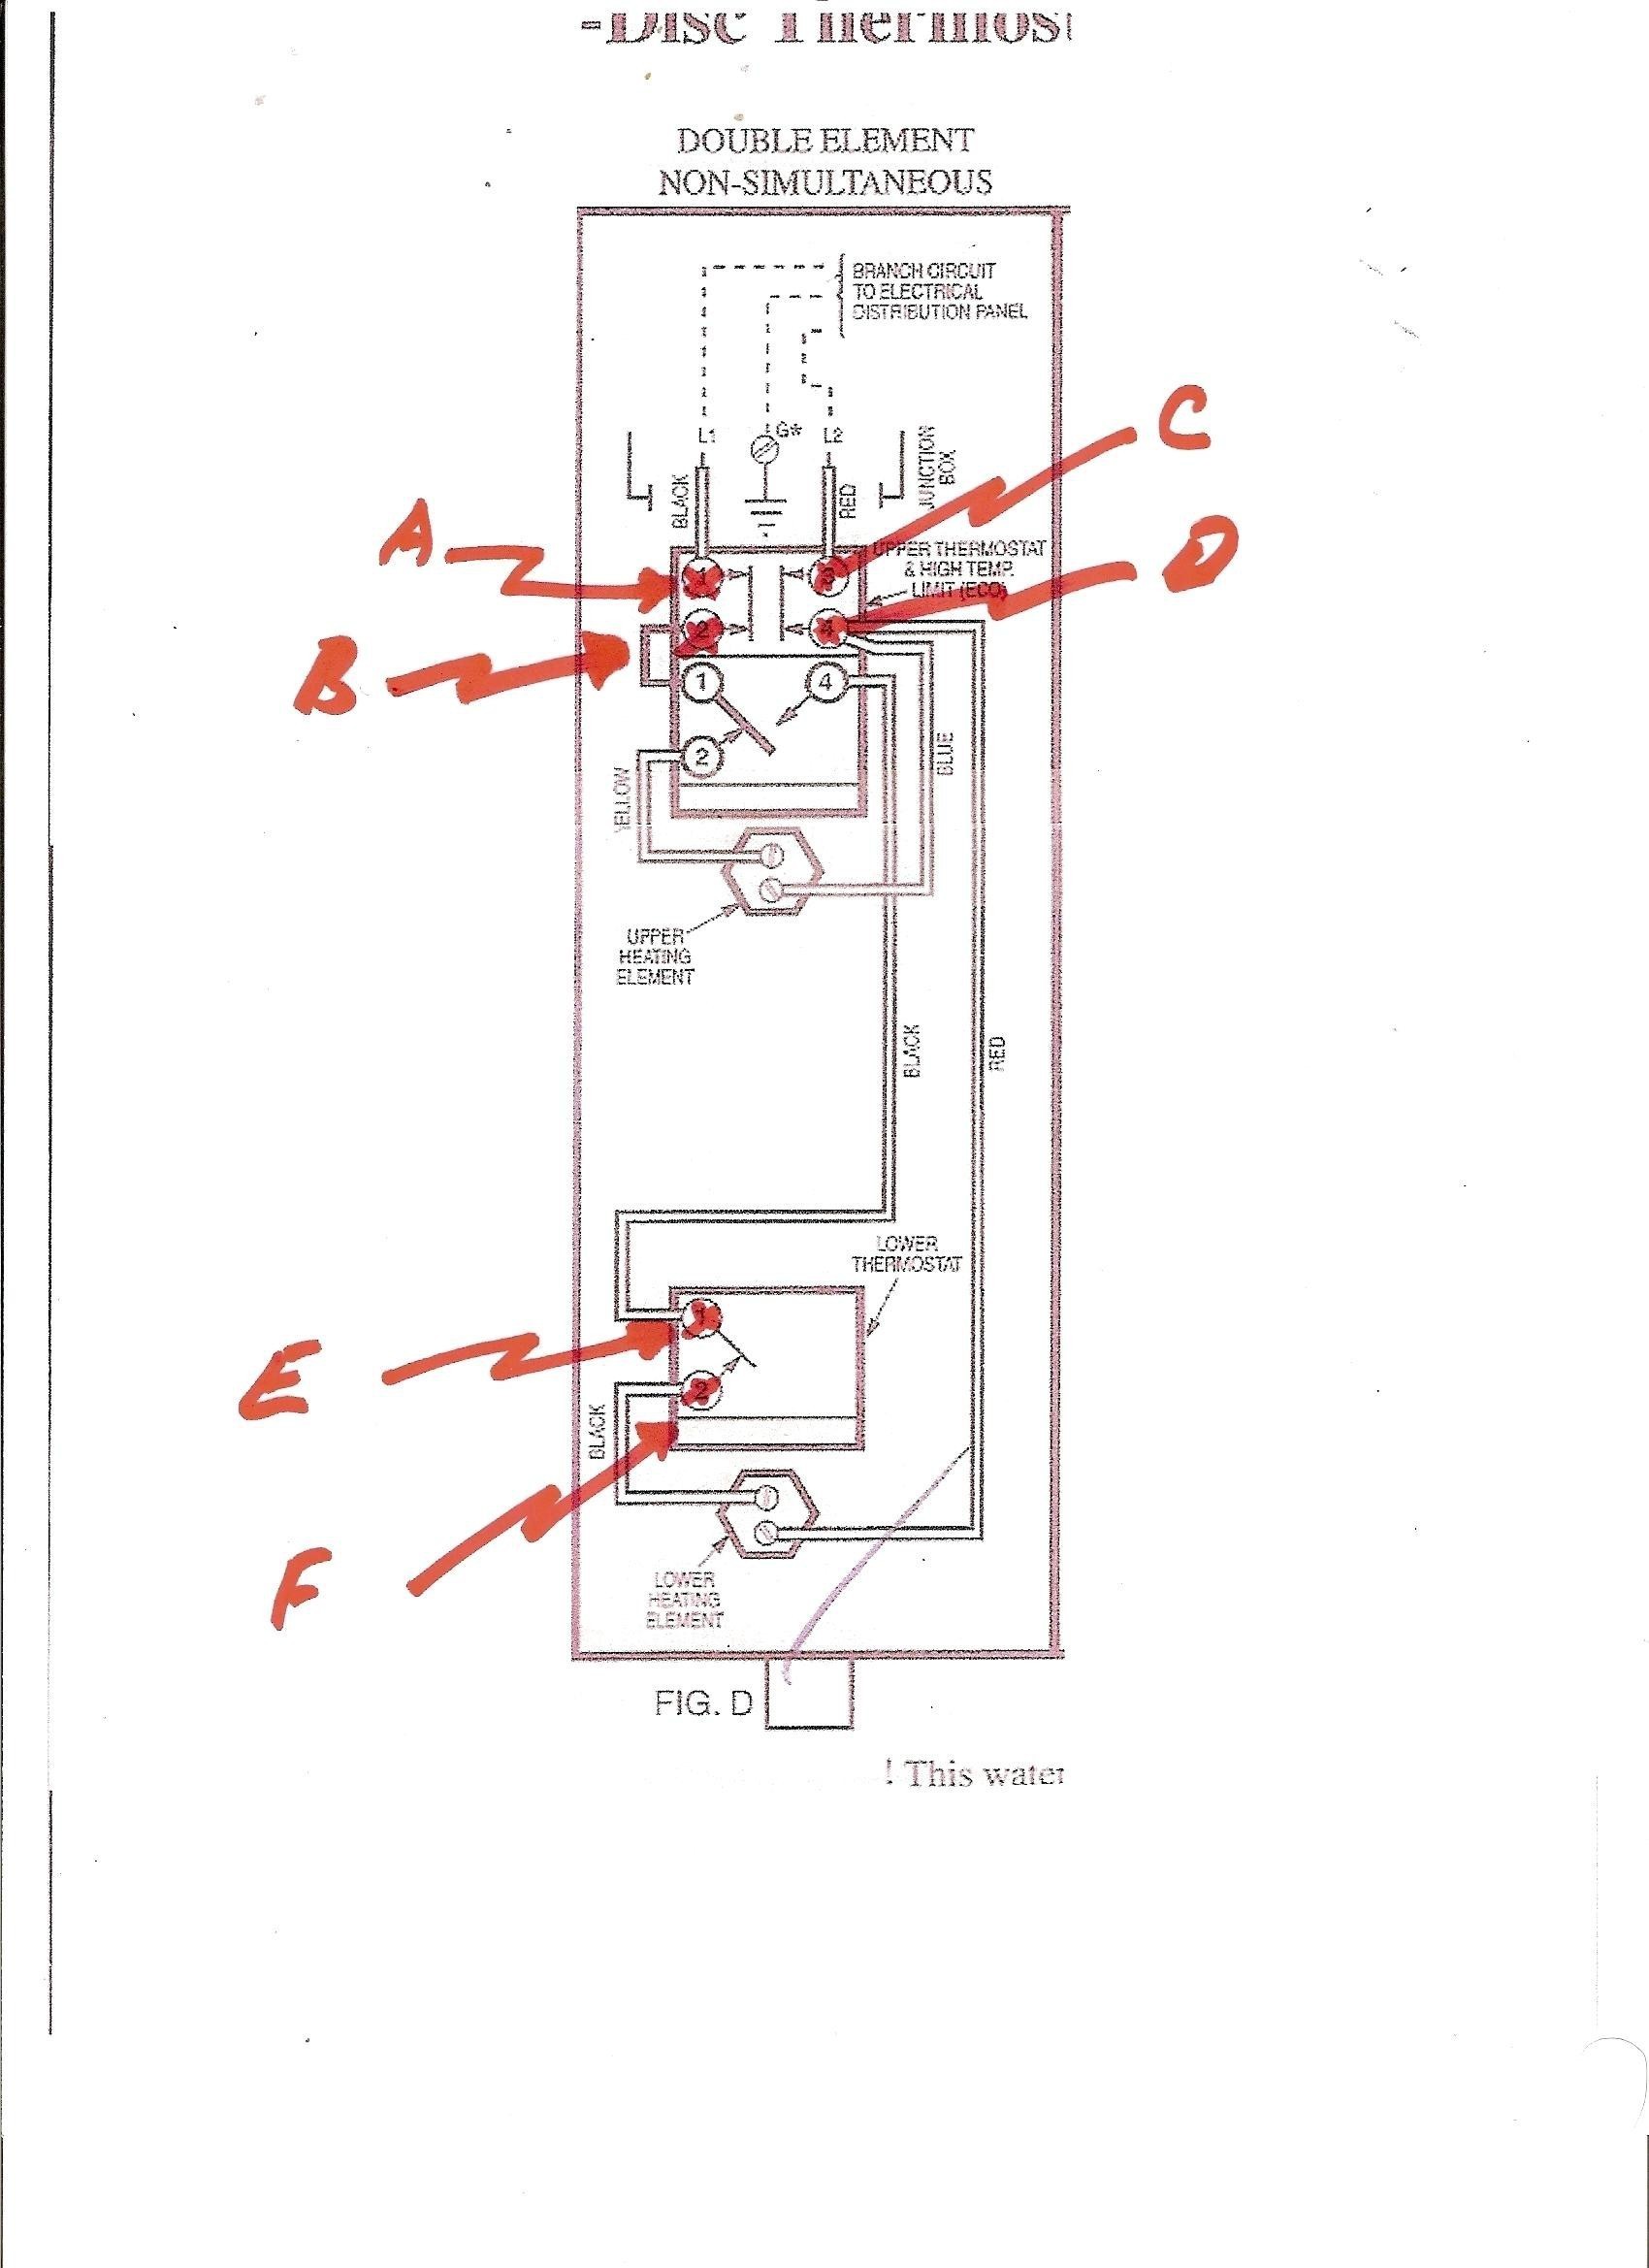 Immersion Heater with thermostat Wiring Diagram New Wiring Diagram Electric Water Heater Best Ruud Water Heater